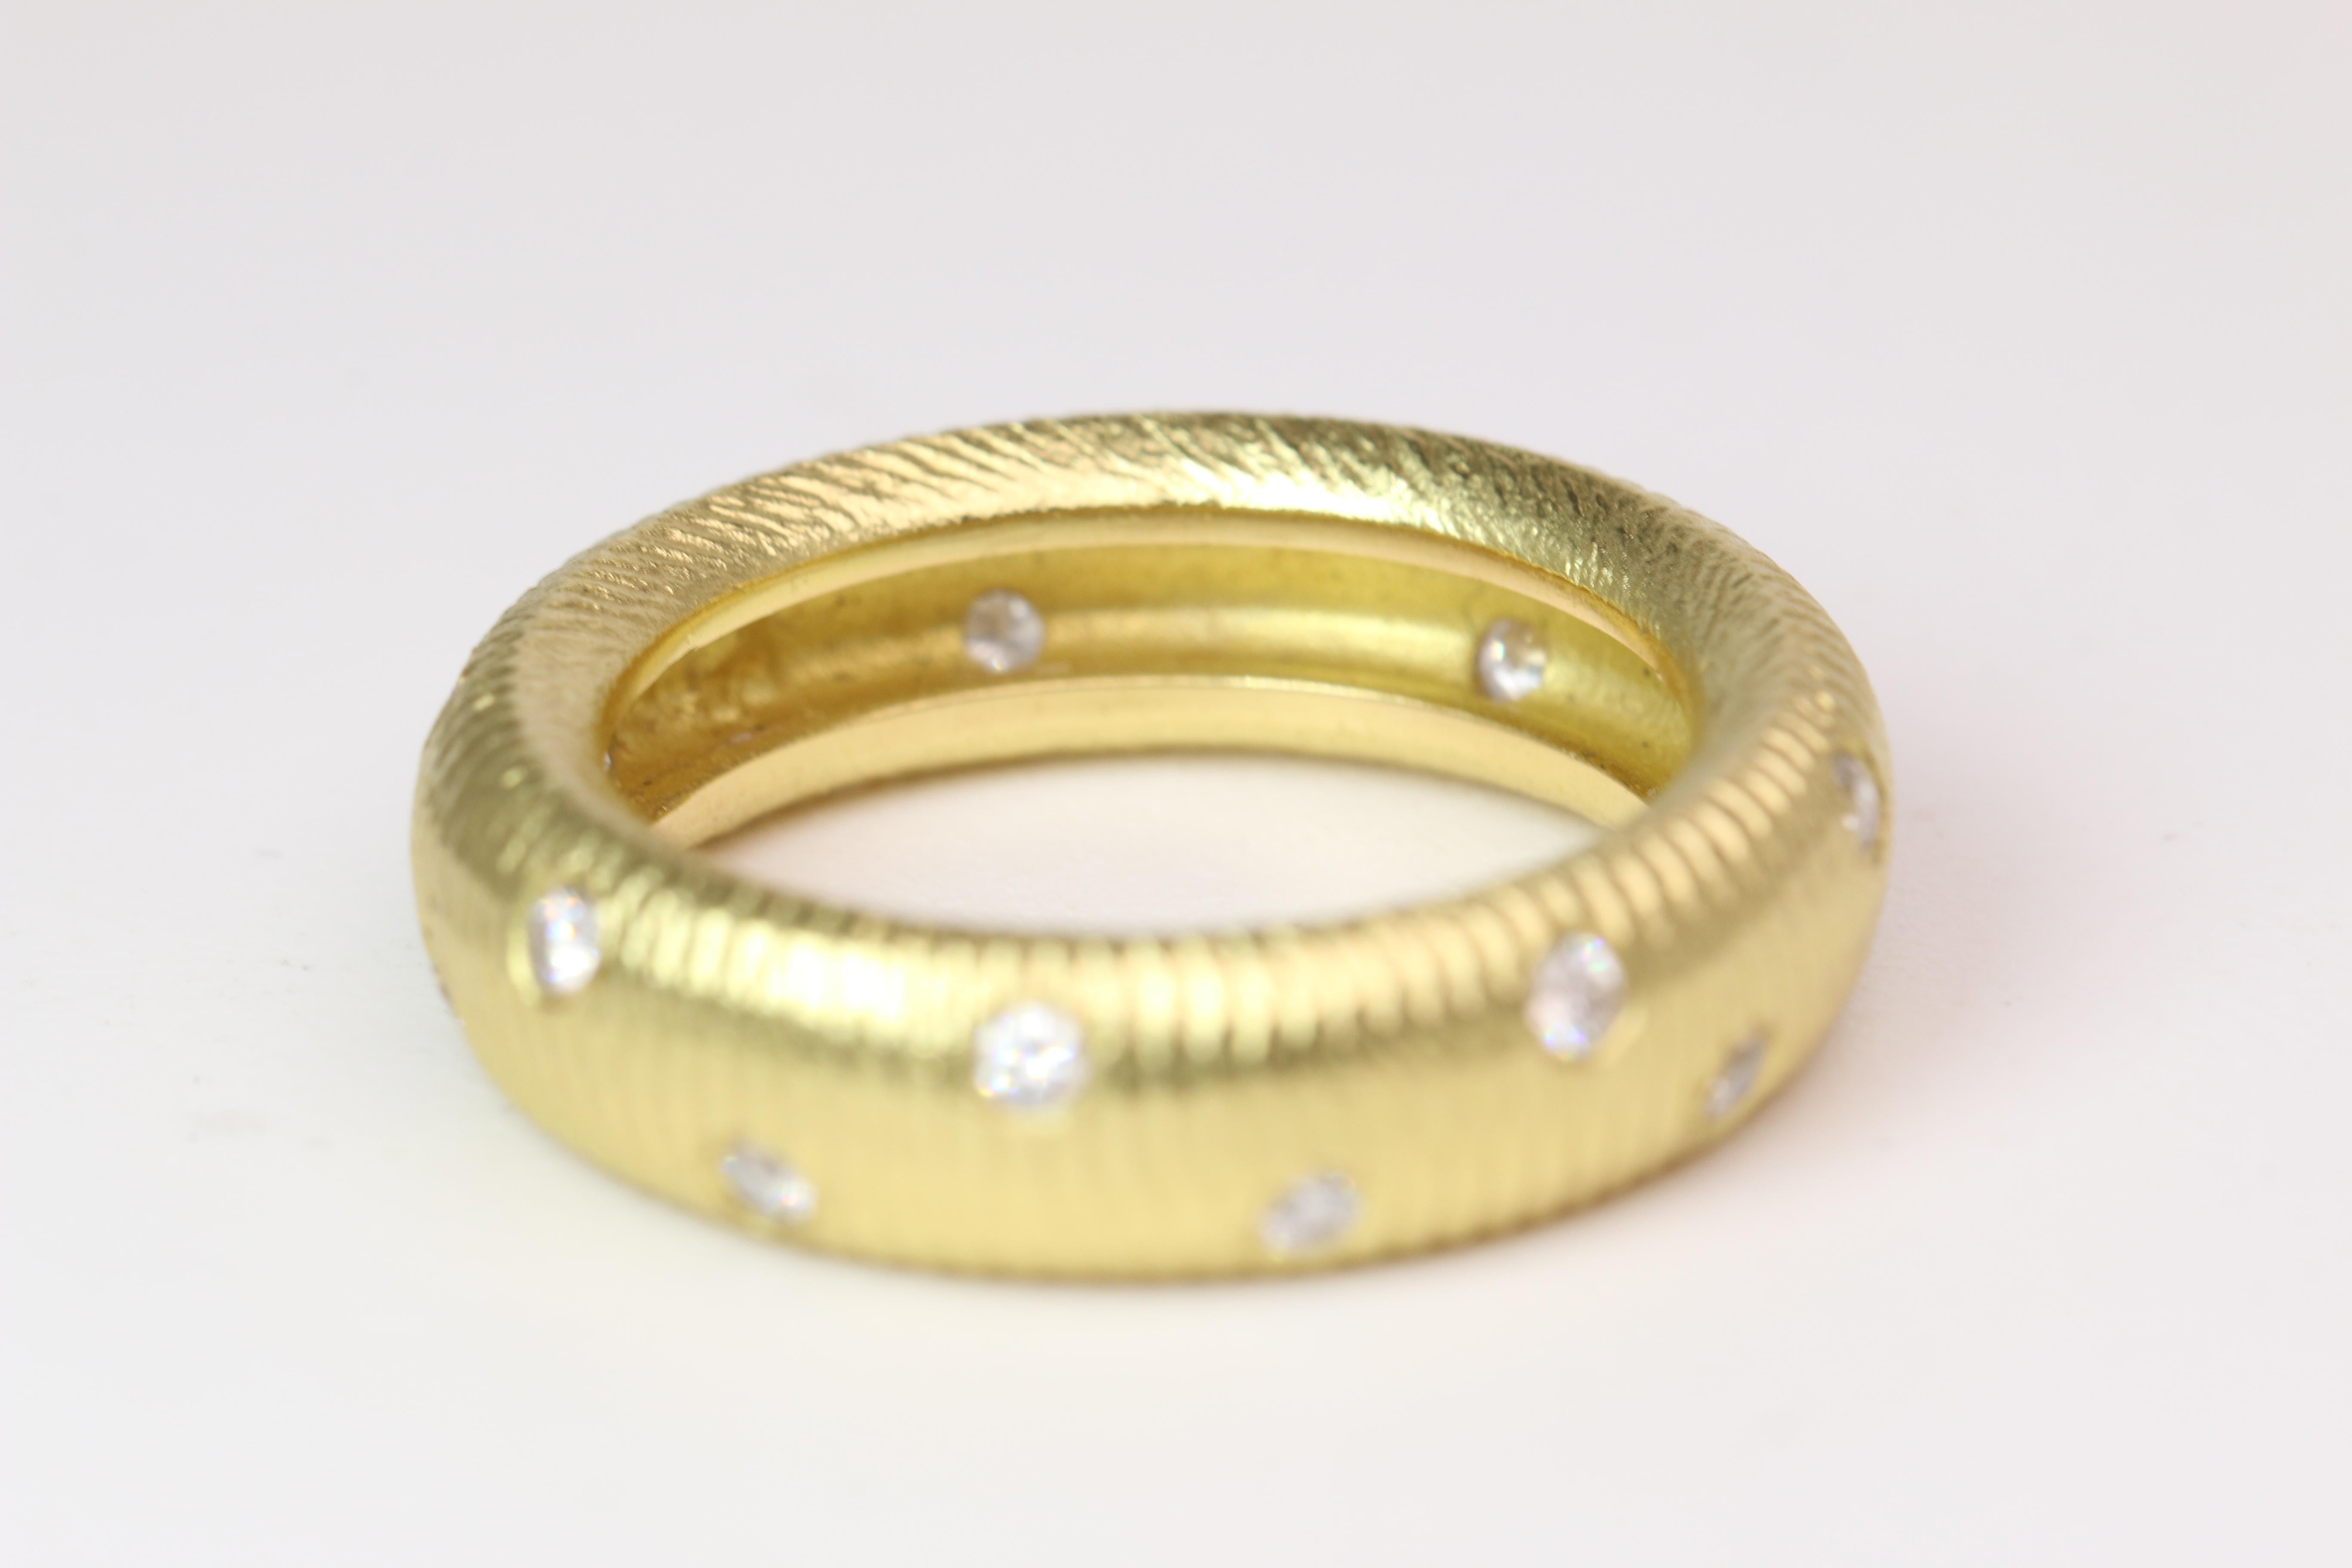 This stunning band features a staple design language from Paul Morelli. Sized to a 6.5 this ring cast in 18k yellow gold features 16 round diamonds and weighs a total of 7.6g.